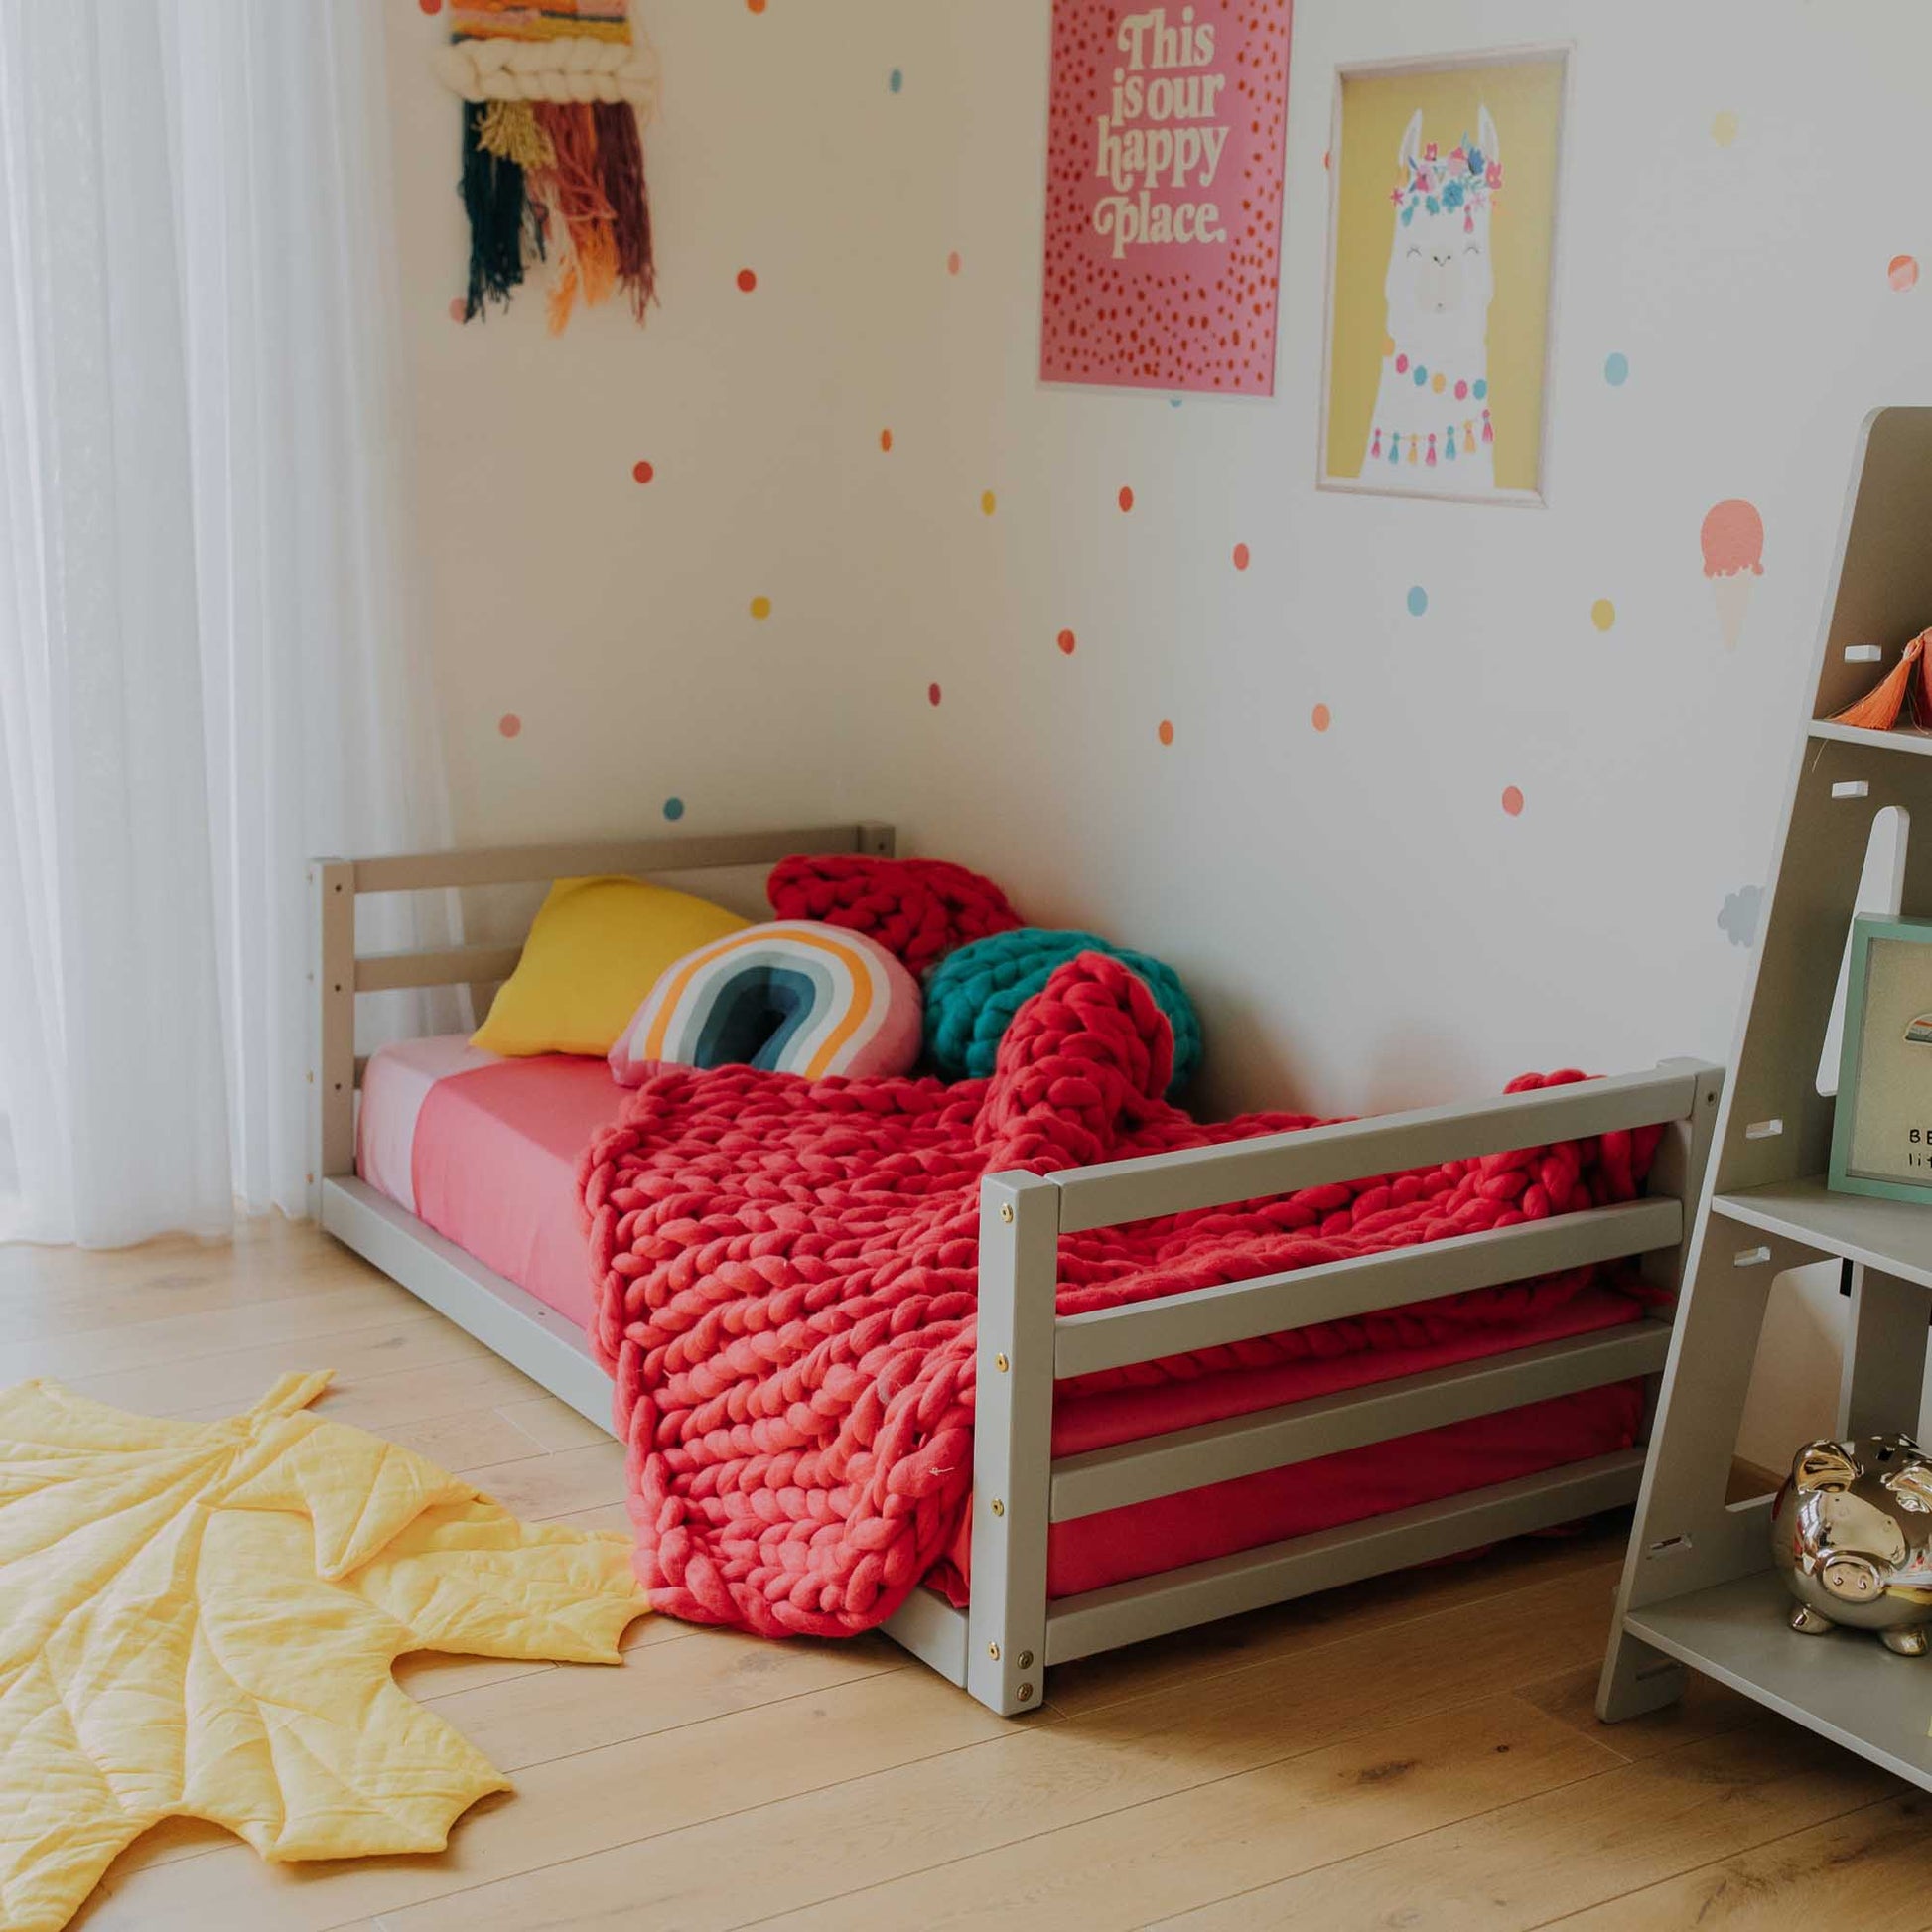 A Toddler floor bed with a horizontal rail headboard and footboard from Sweet Home From Wood in a child's room.